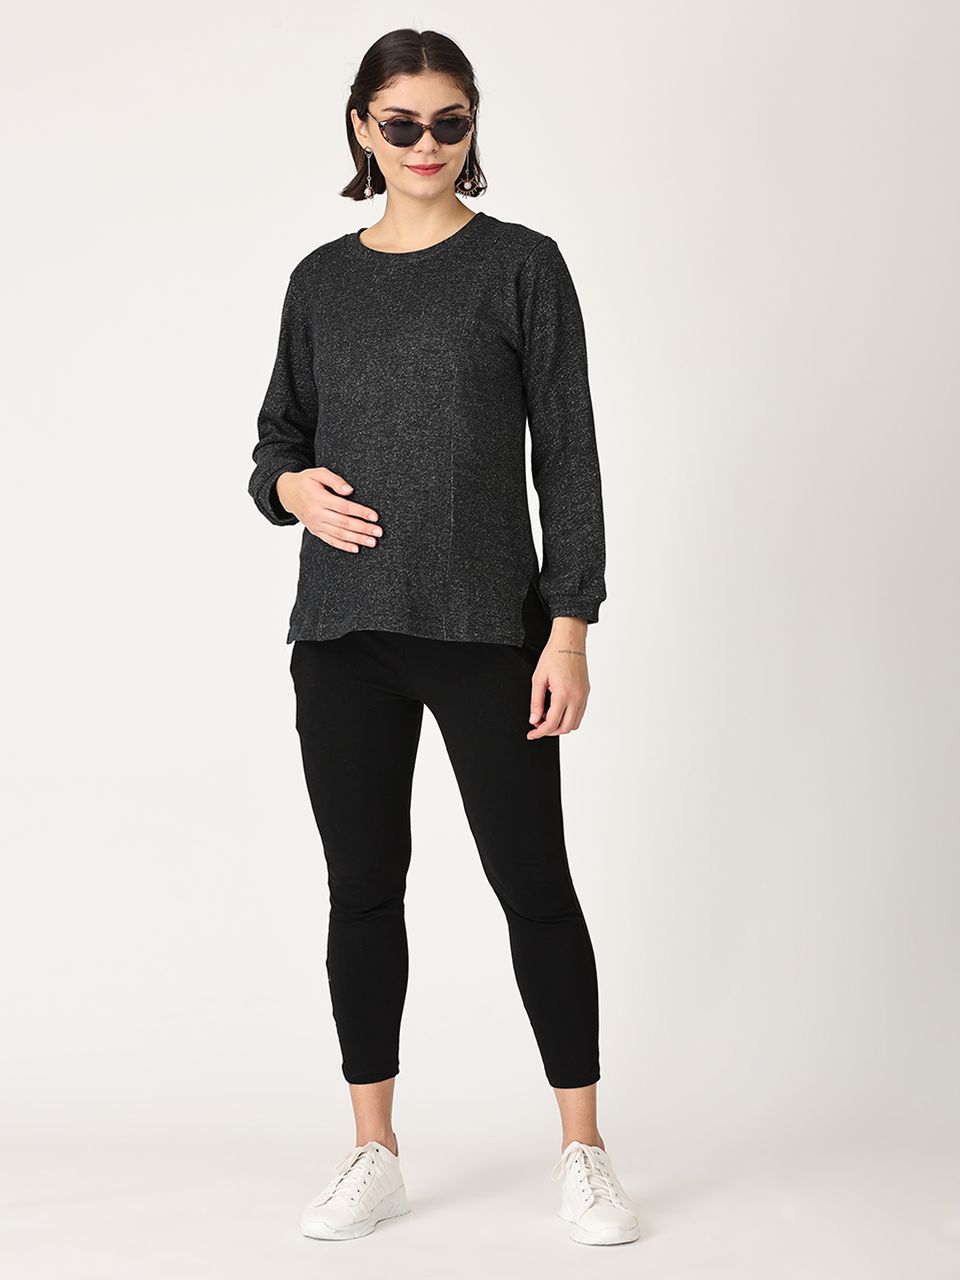 The Mom Store Combo Of Eclipse Maternity Sweatshirt With Black Leggings